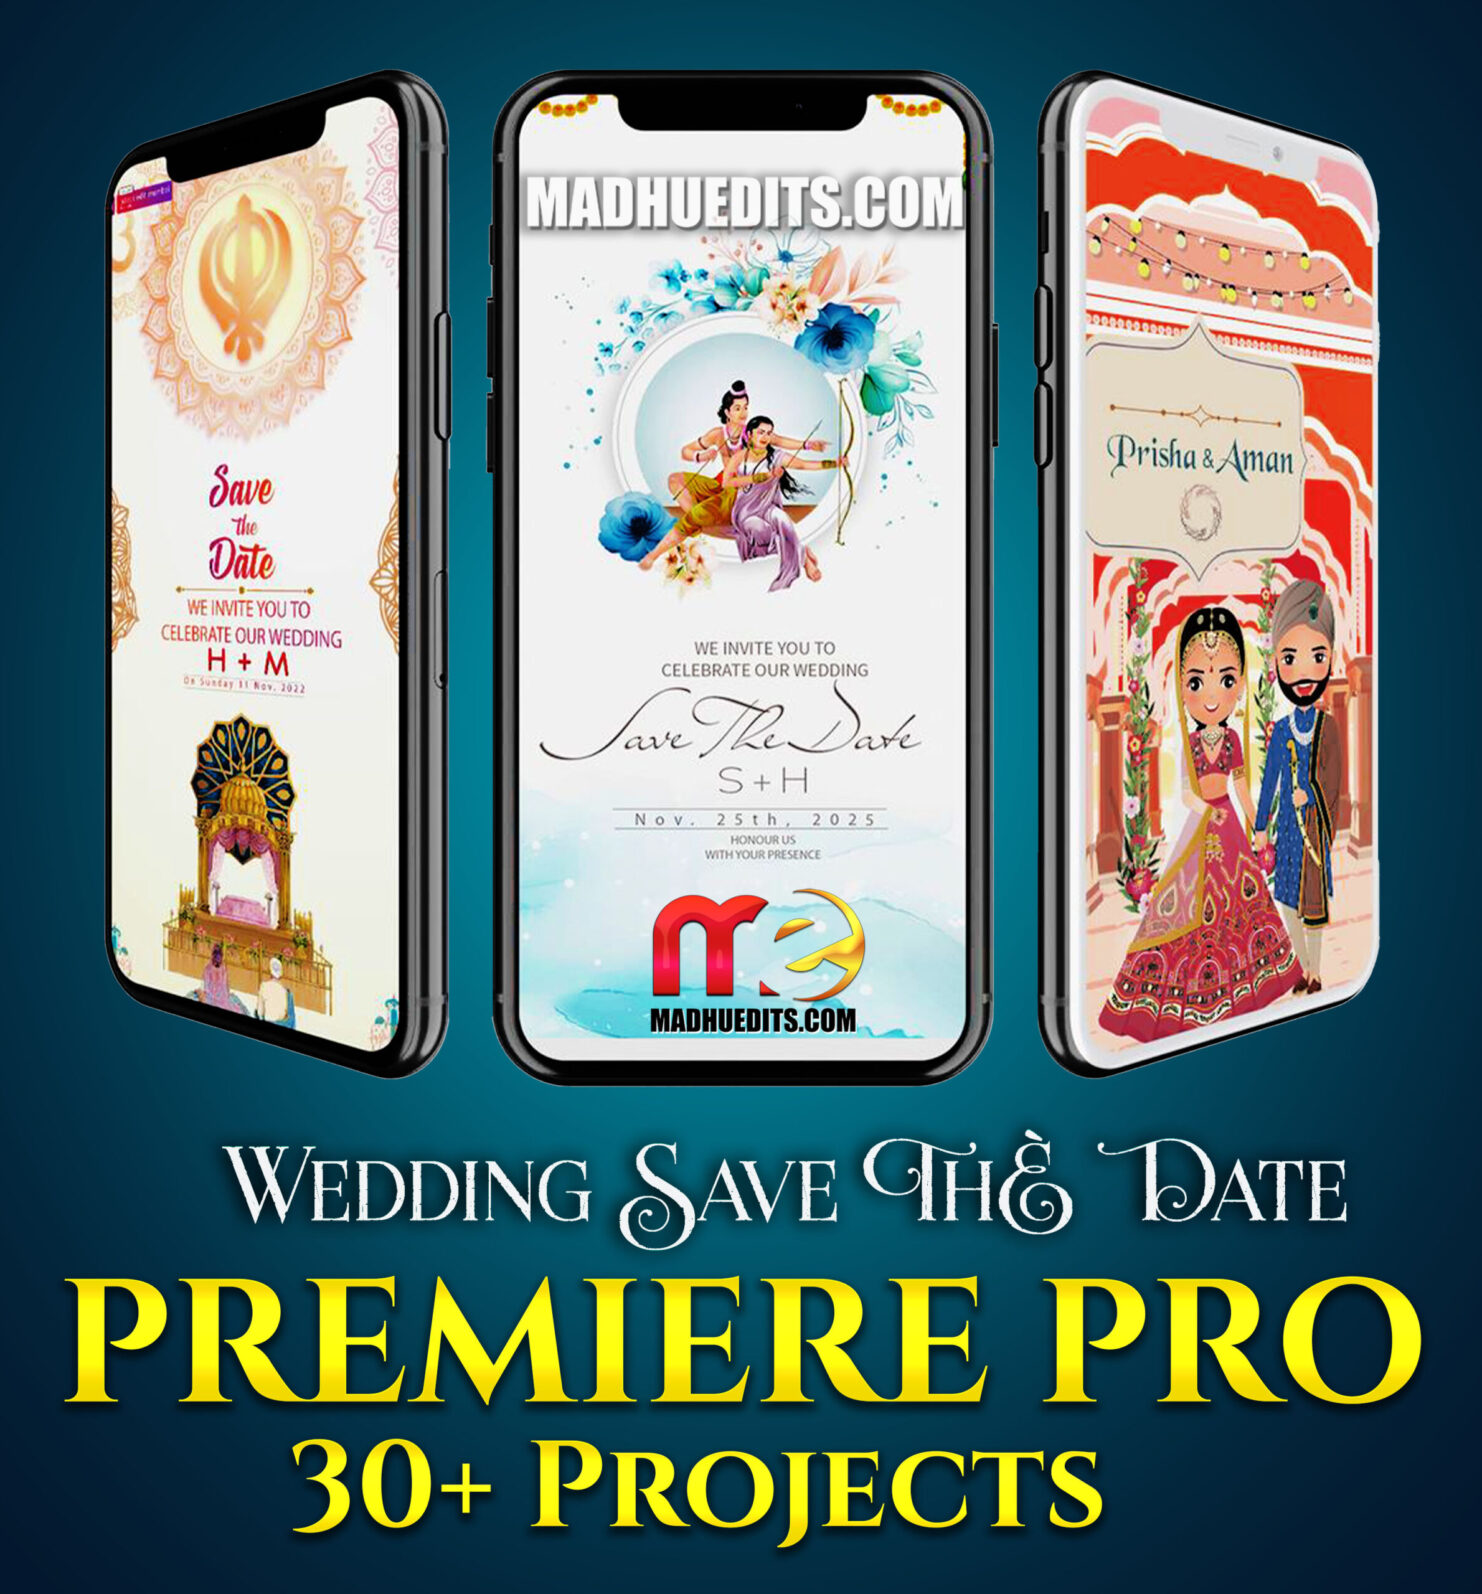 Wedding Save The Date – Premiere Pro Latest 30+ Projects